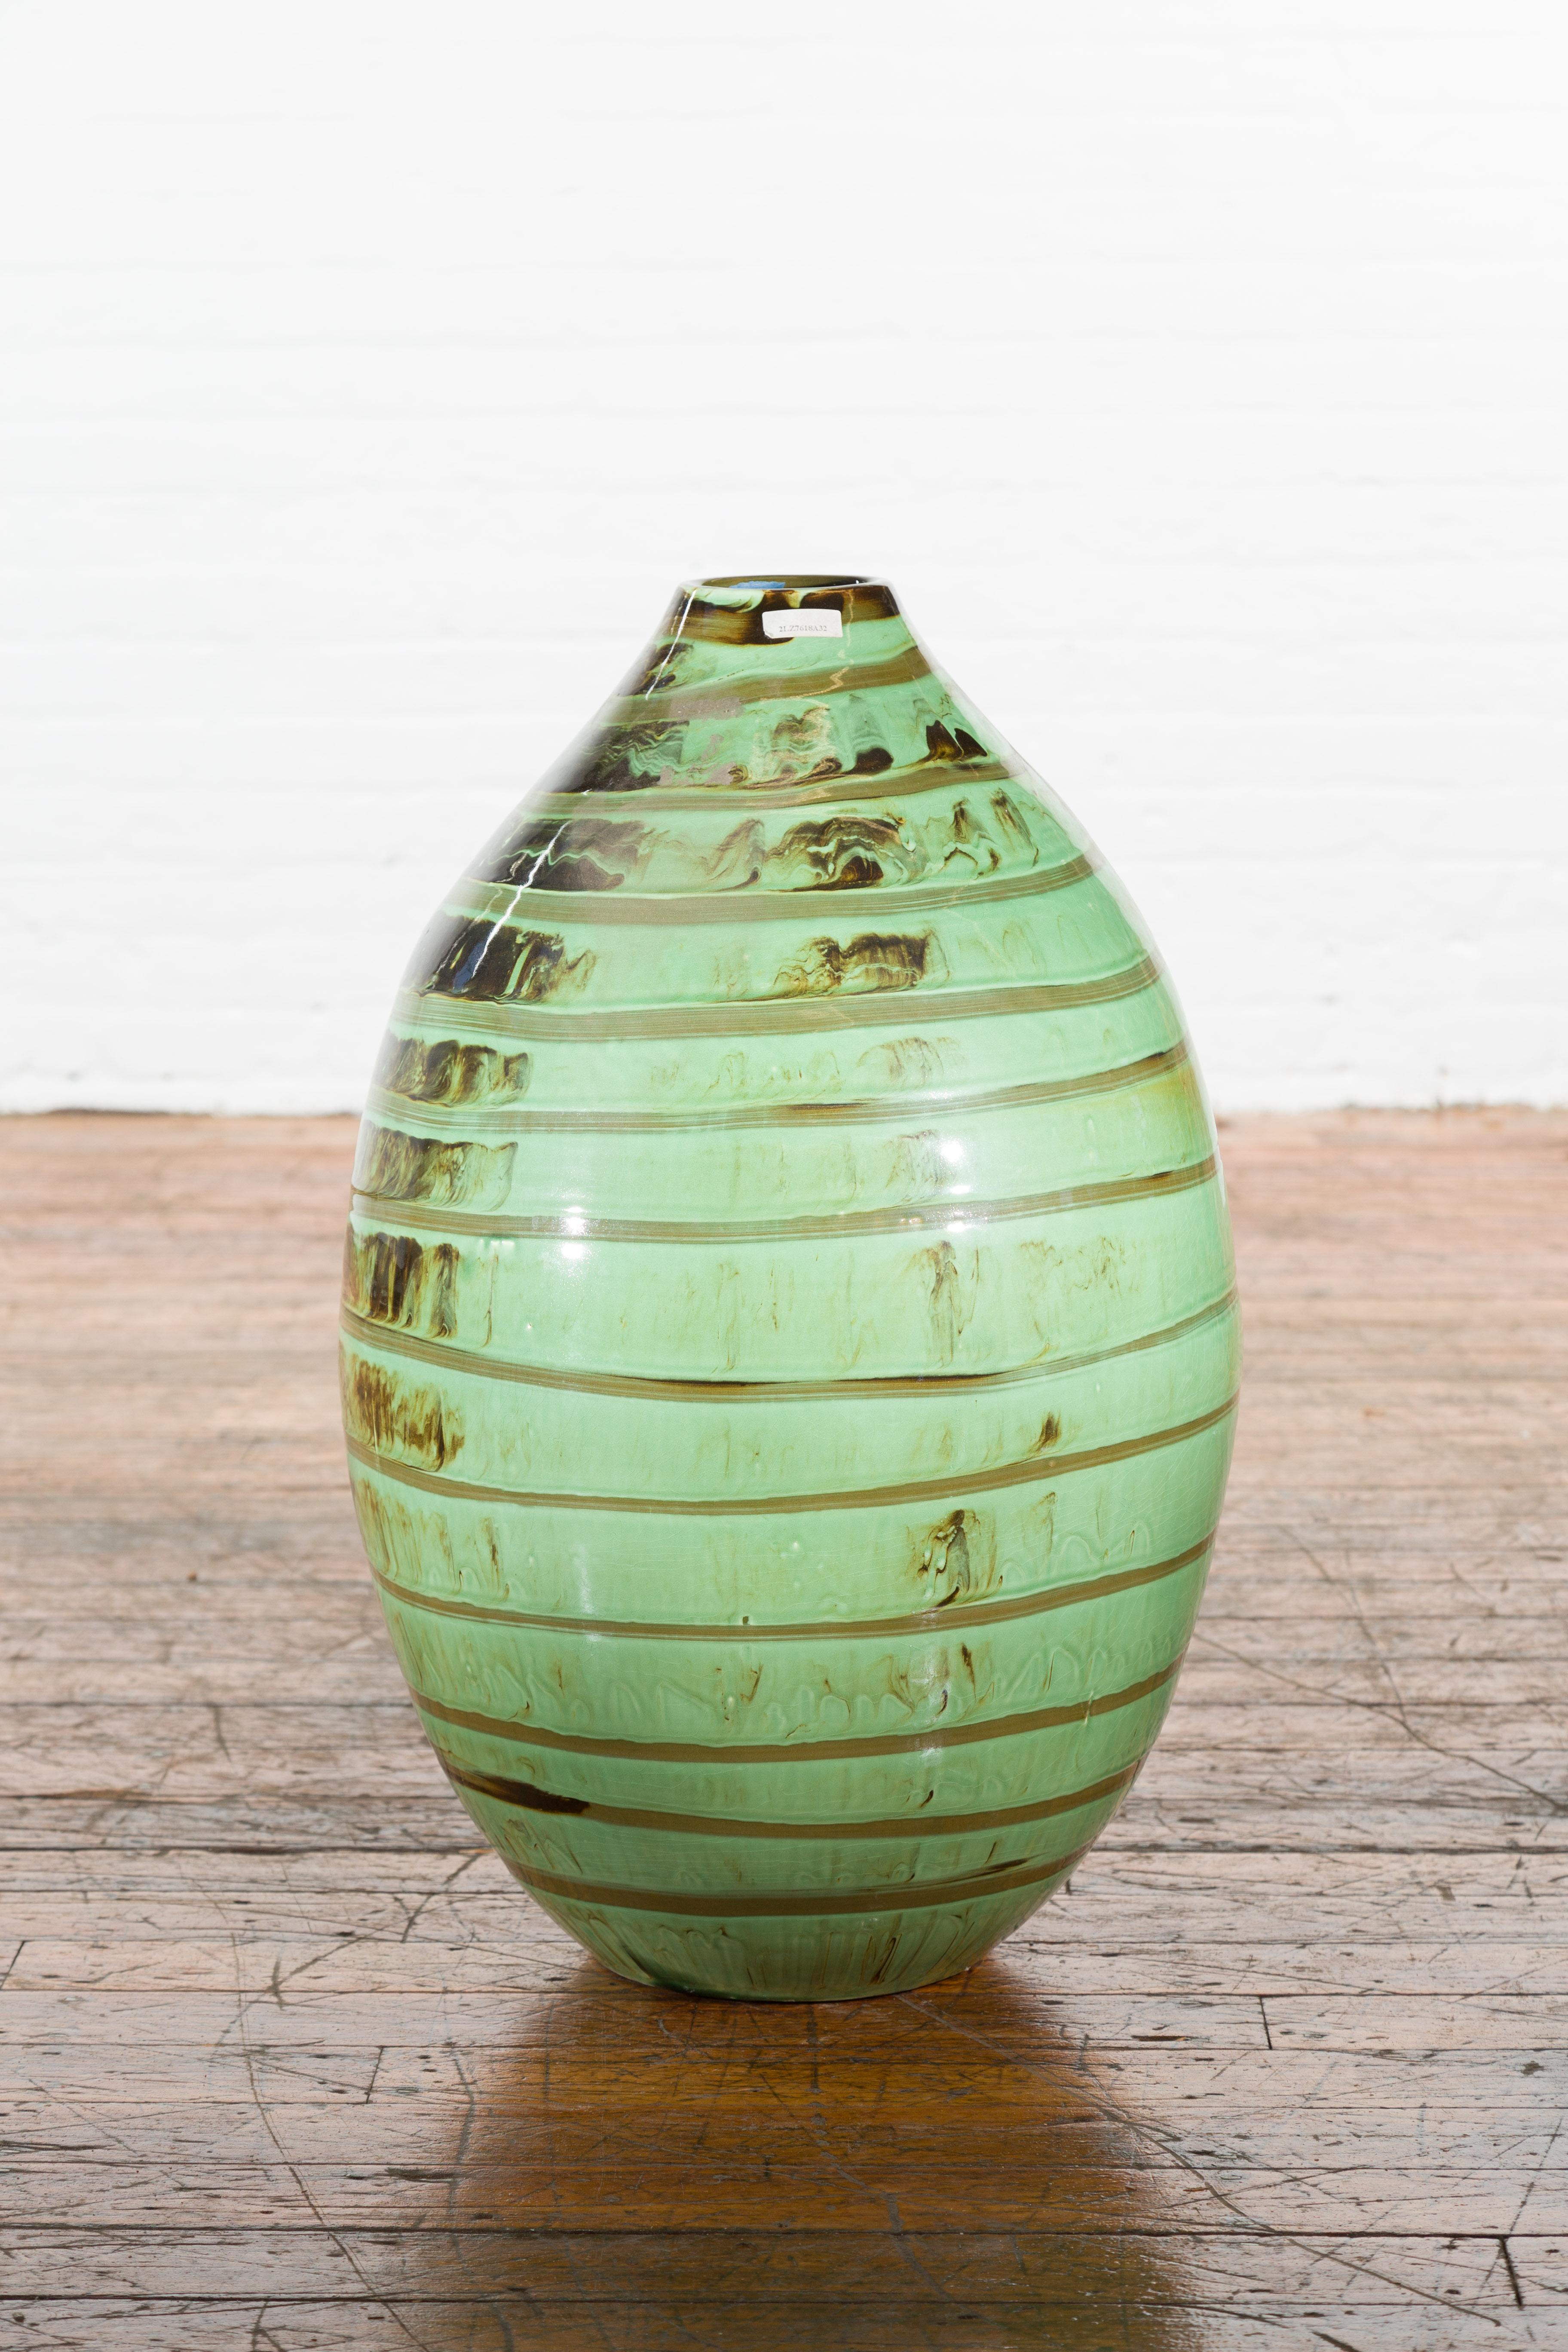 Artisan Contemporary Green and Brown Glaze Ceramic Vase with Spiral Decor For Sale 5